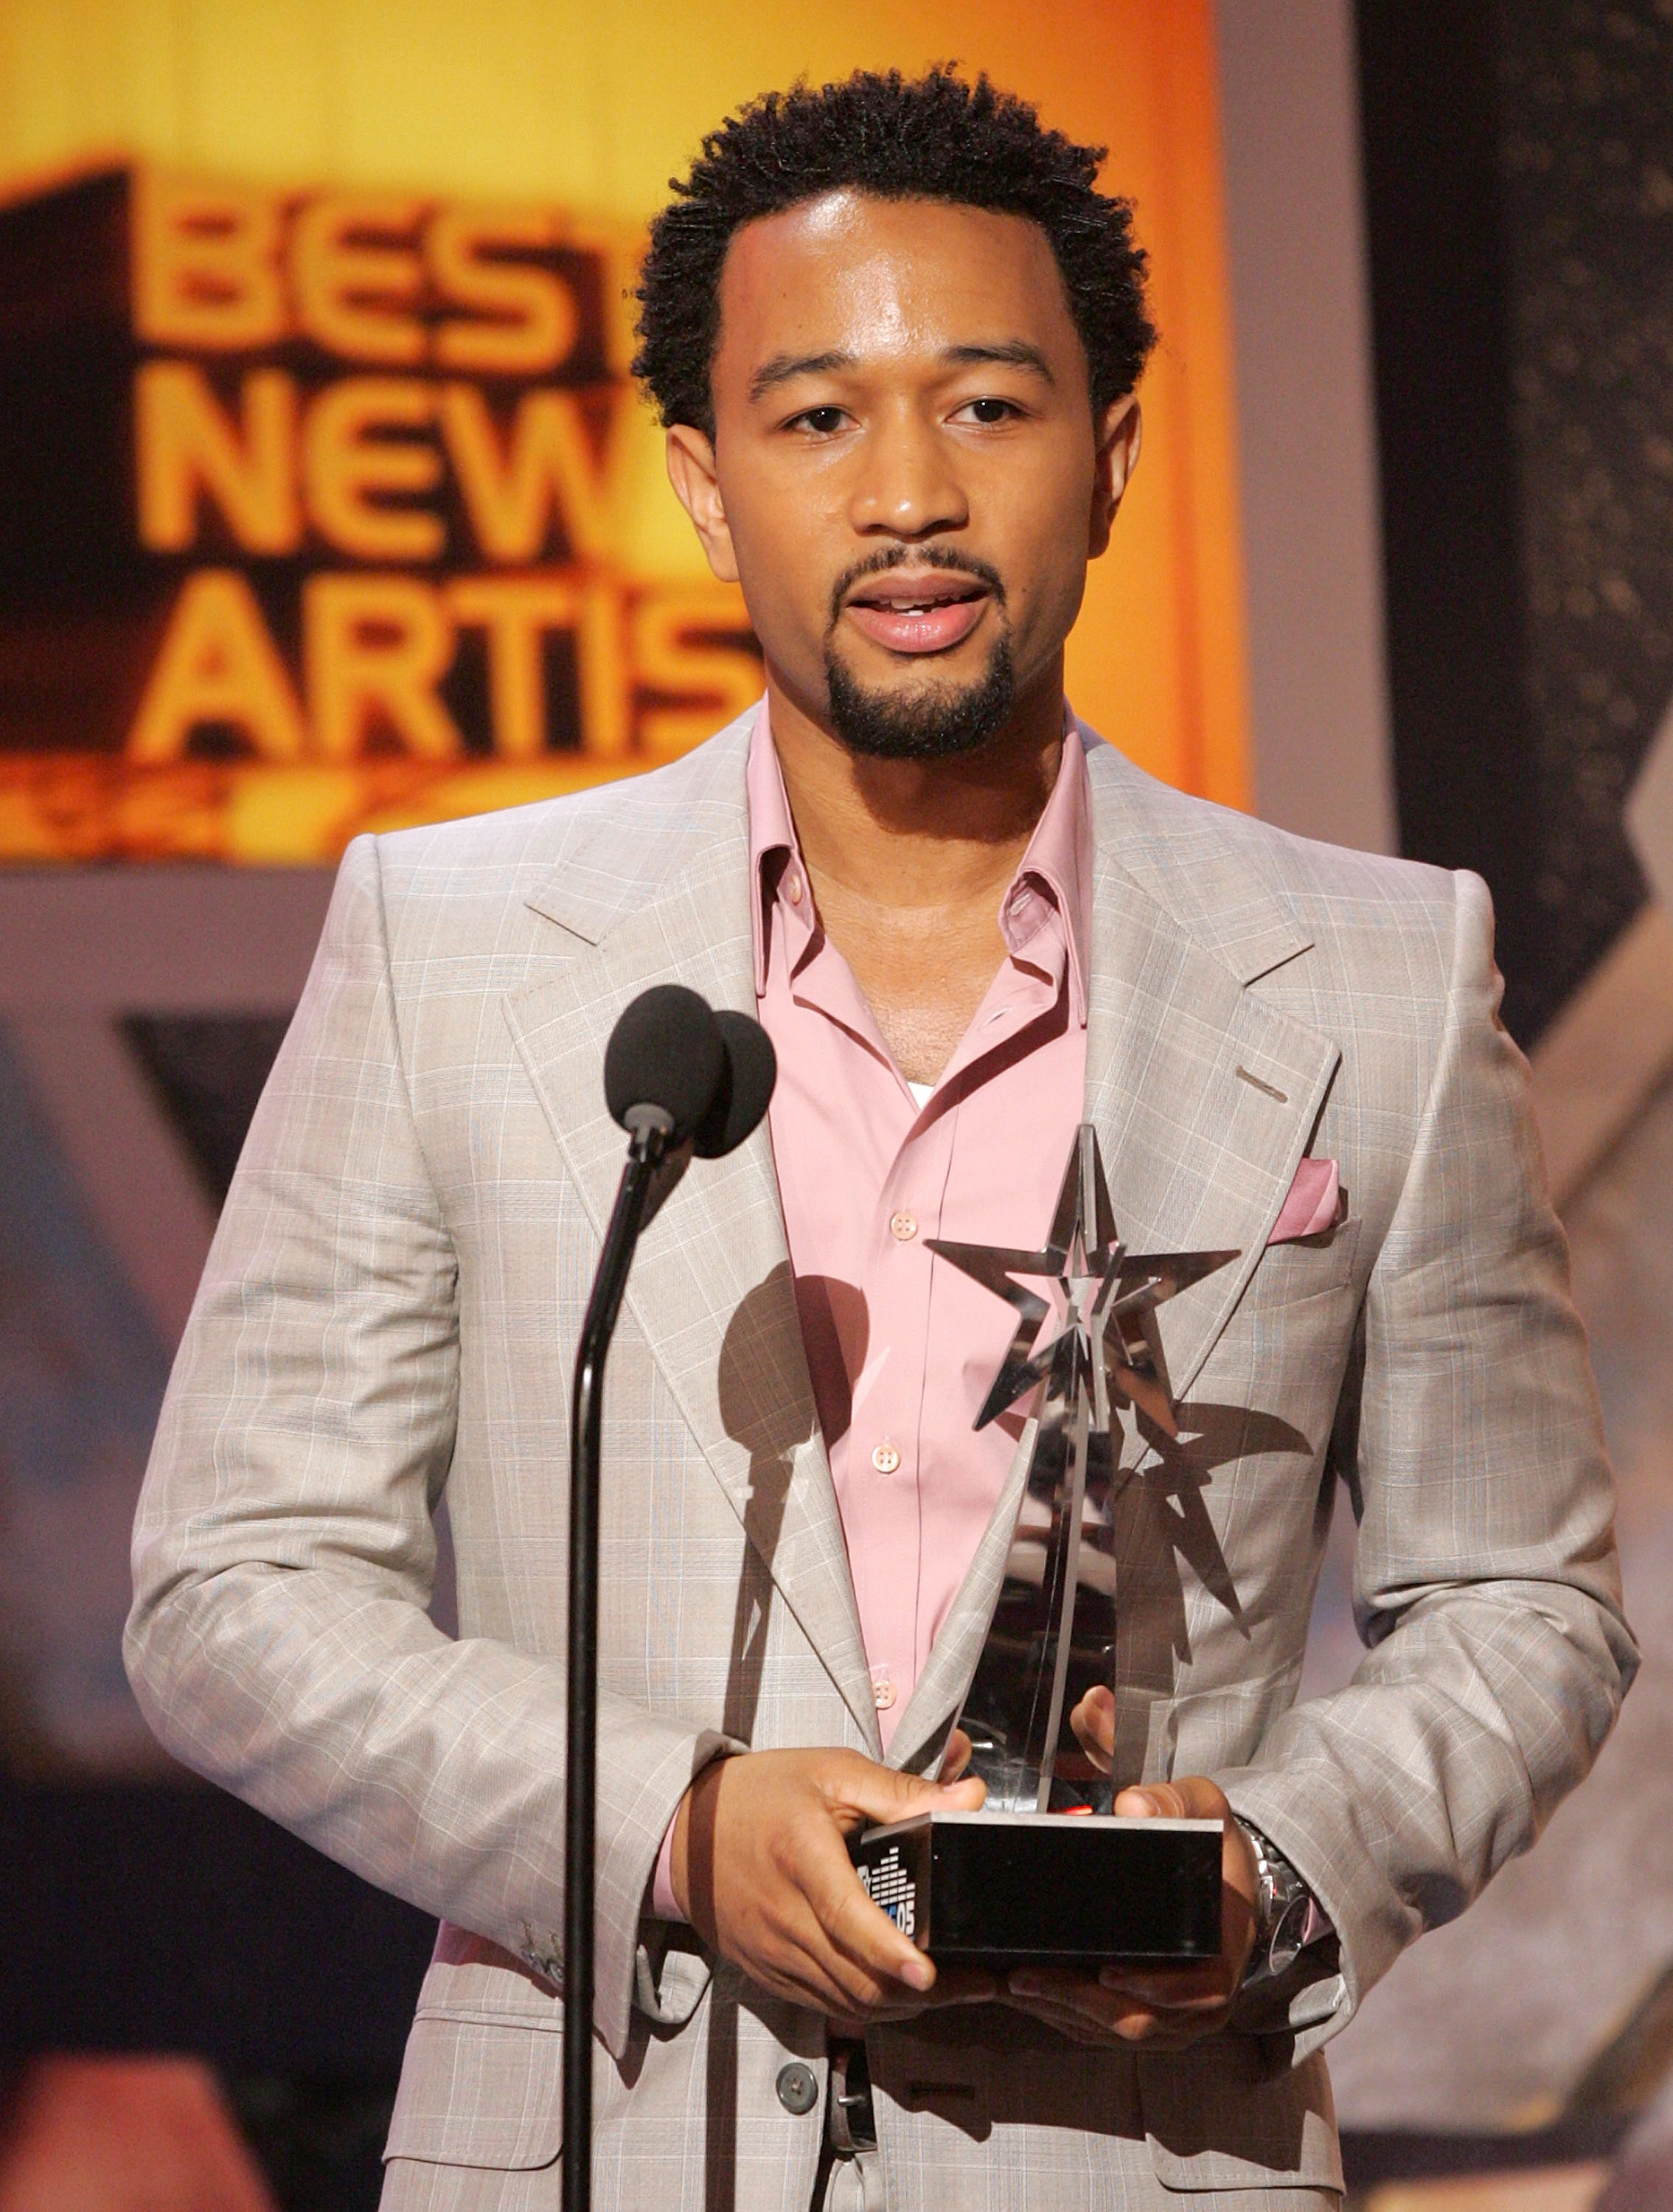 John Legend accepting the award for Best Male R&B Artist at the BET Awards on June 28, 2005, in Hollywood, California. | Source: Getty Images